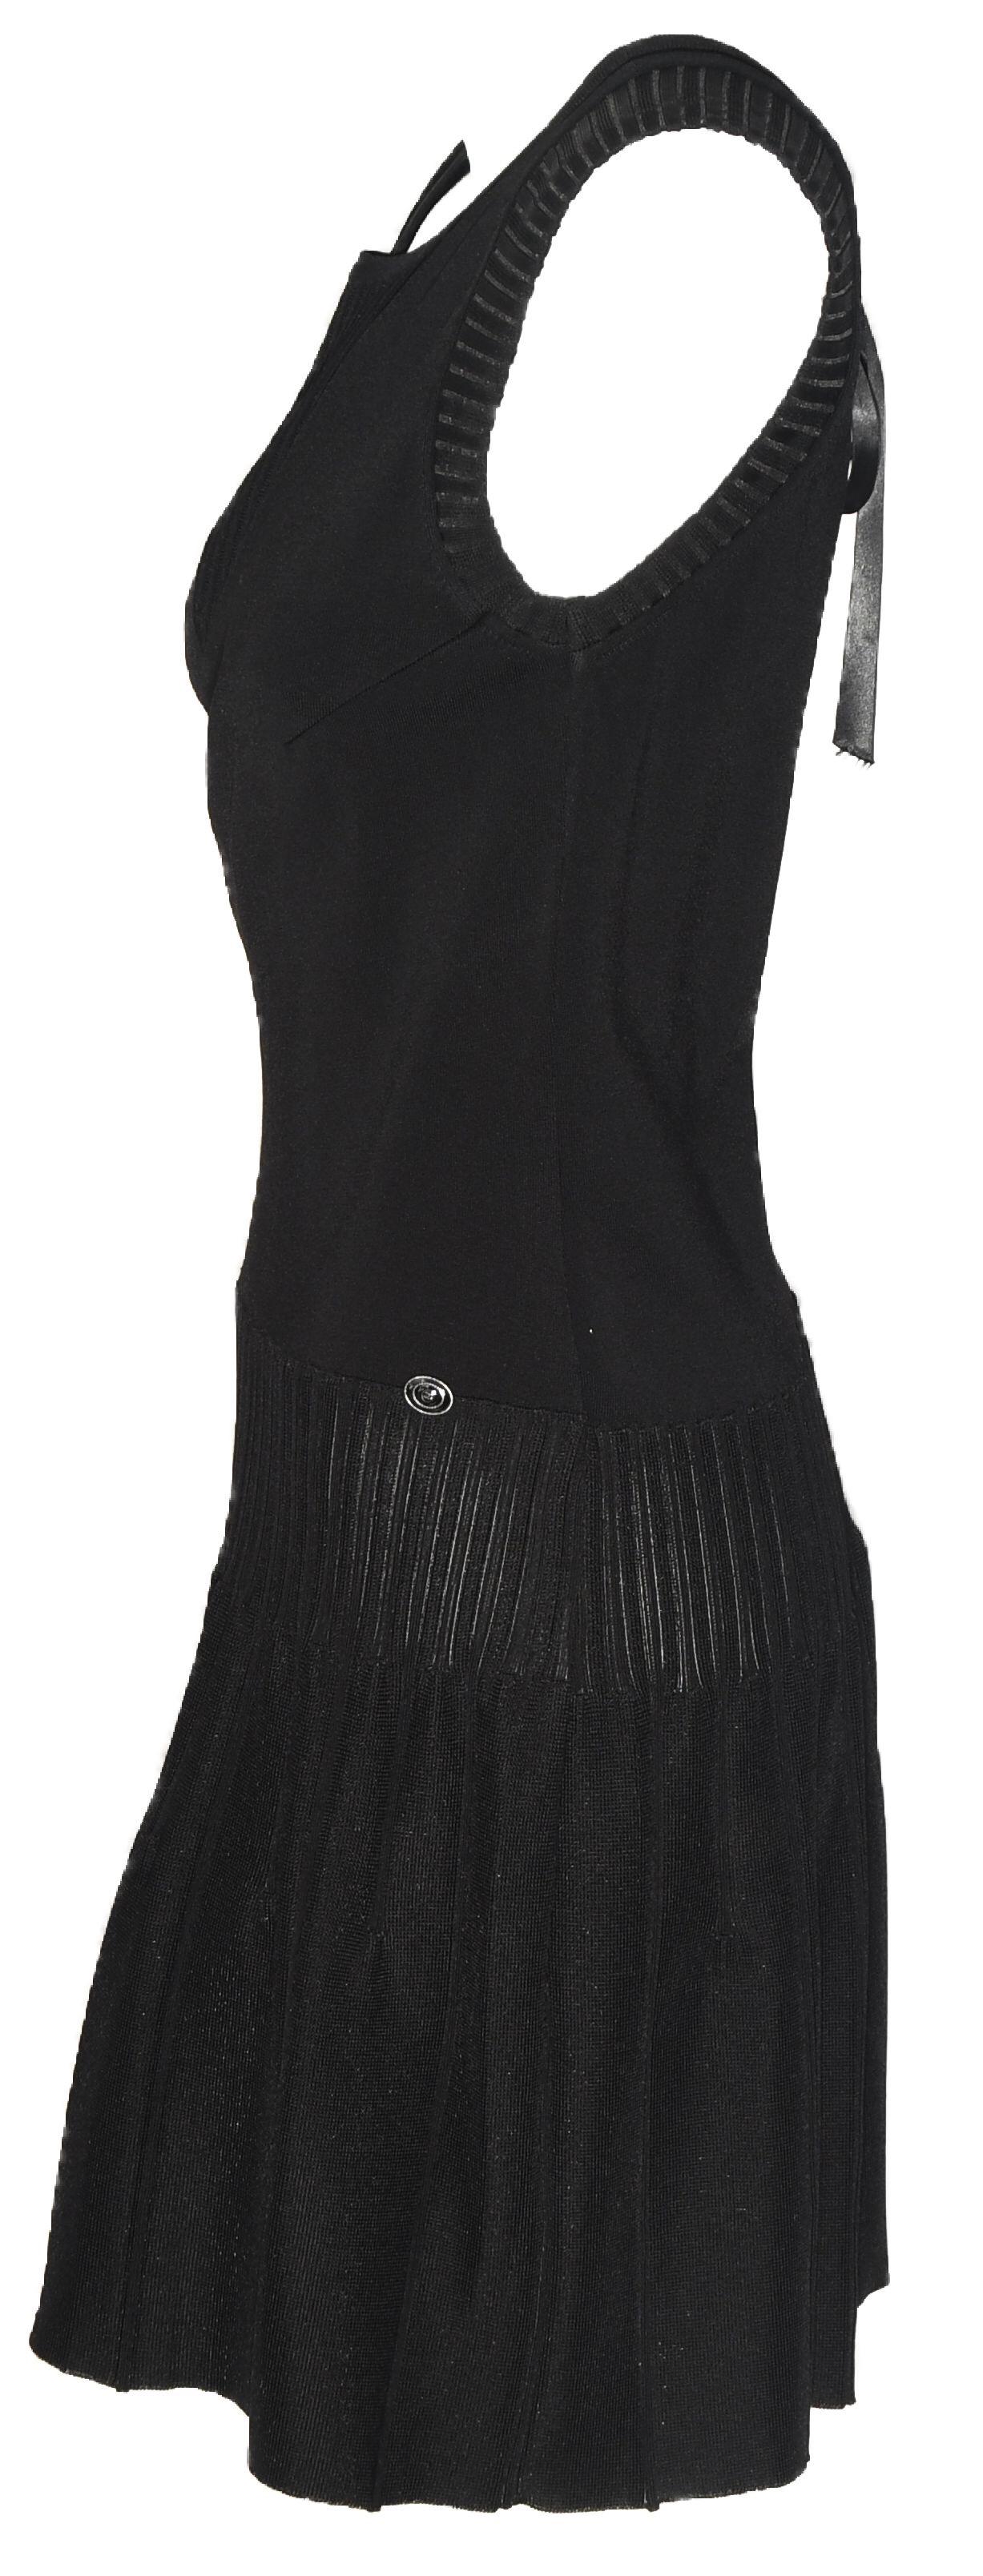 Chanel black sleeveless dress includes a V peek a boo back that is tied with a black satin bow.  This dress is ribbed at the front V neck and the slight drop sleeves.  With a drop waist to the hips this dress is gathered with mini ribbed pleats then